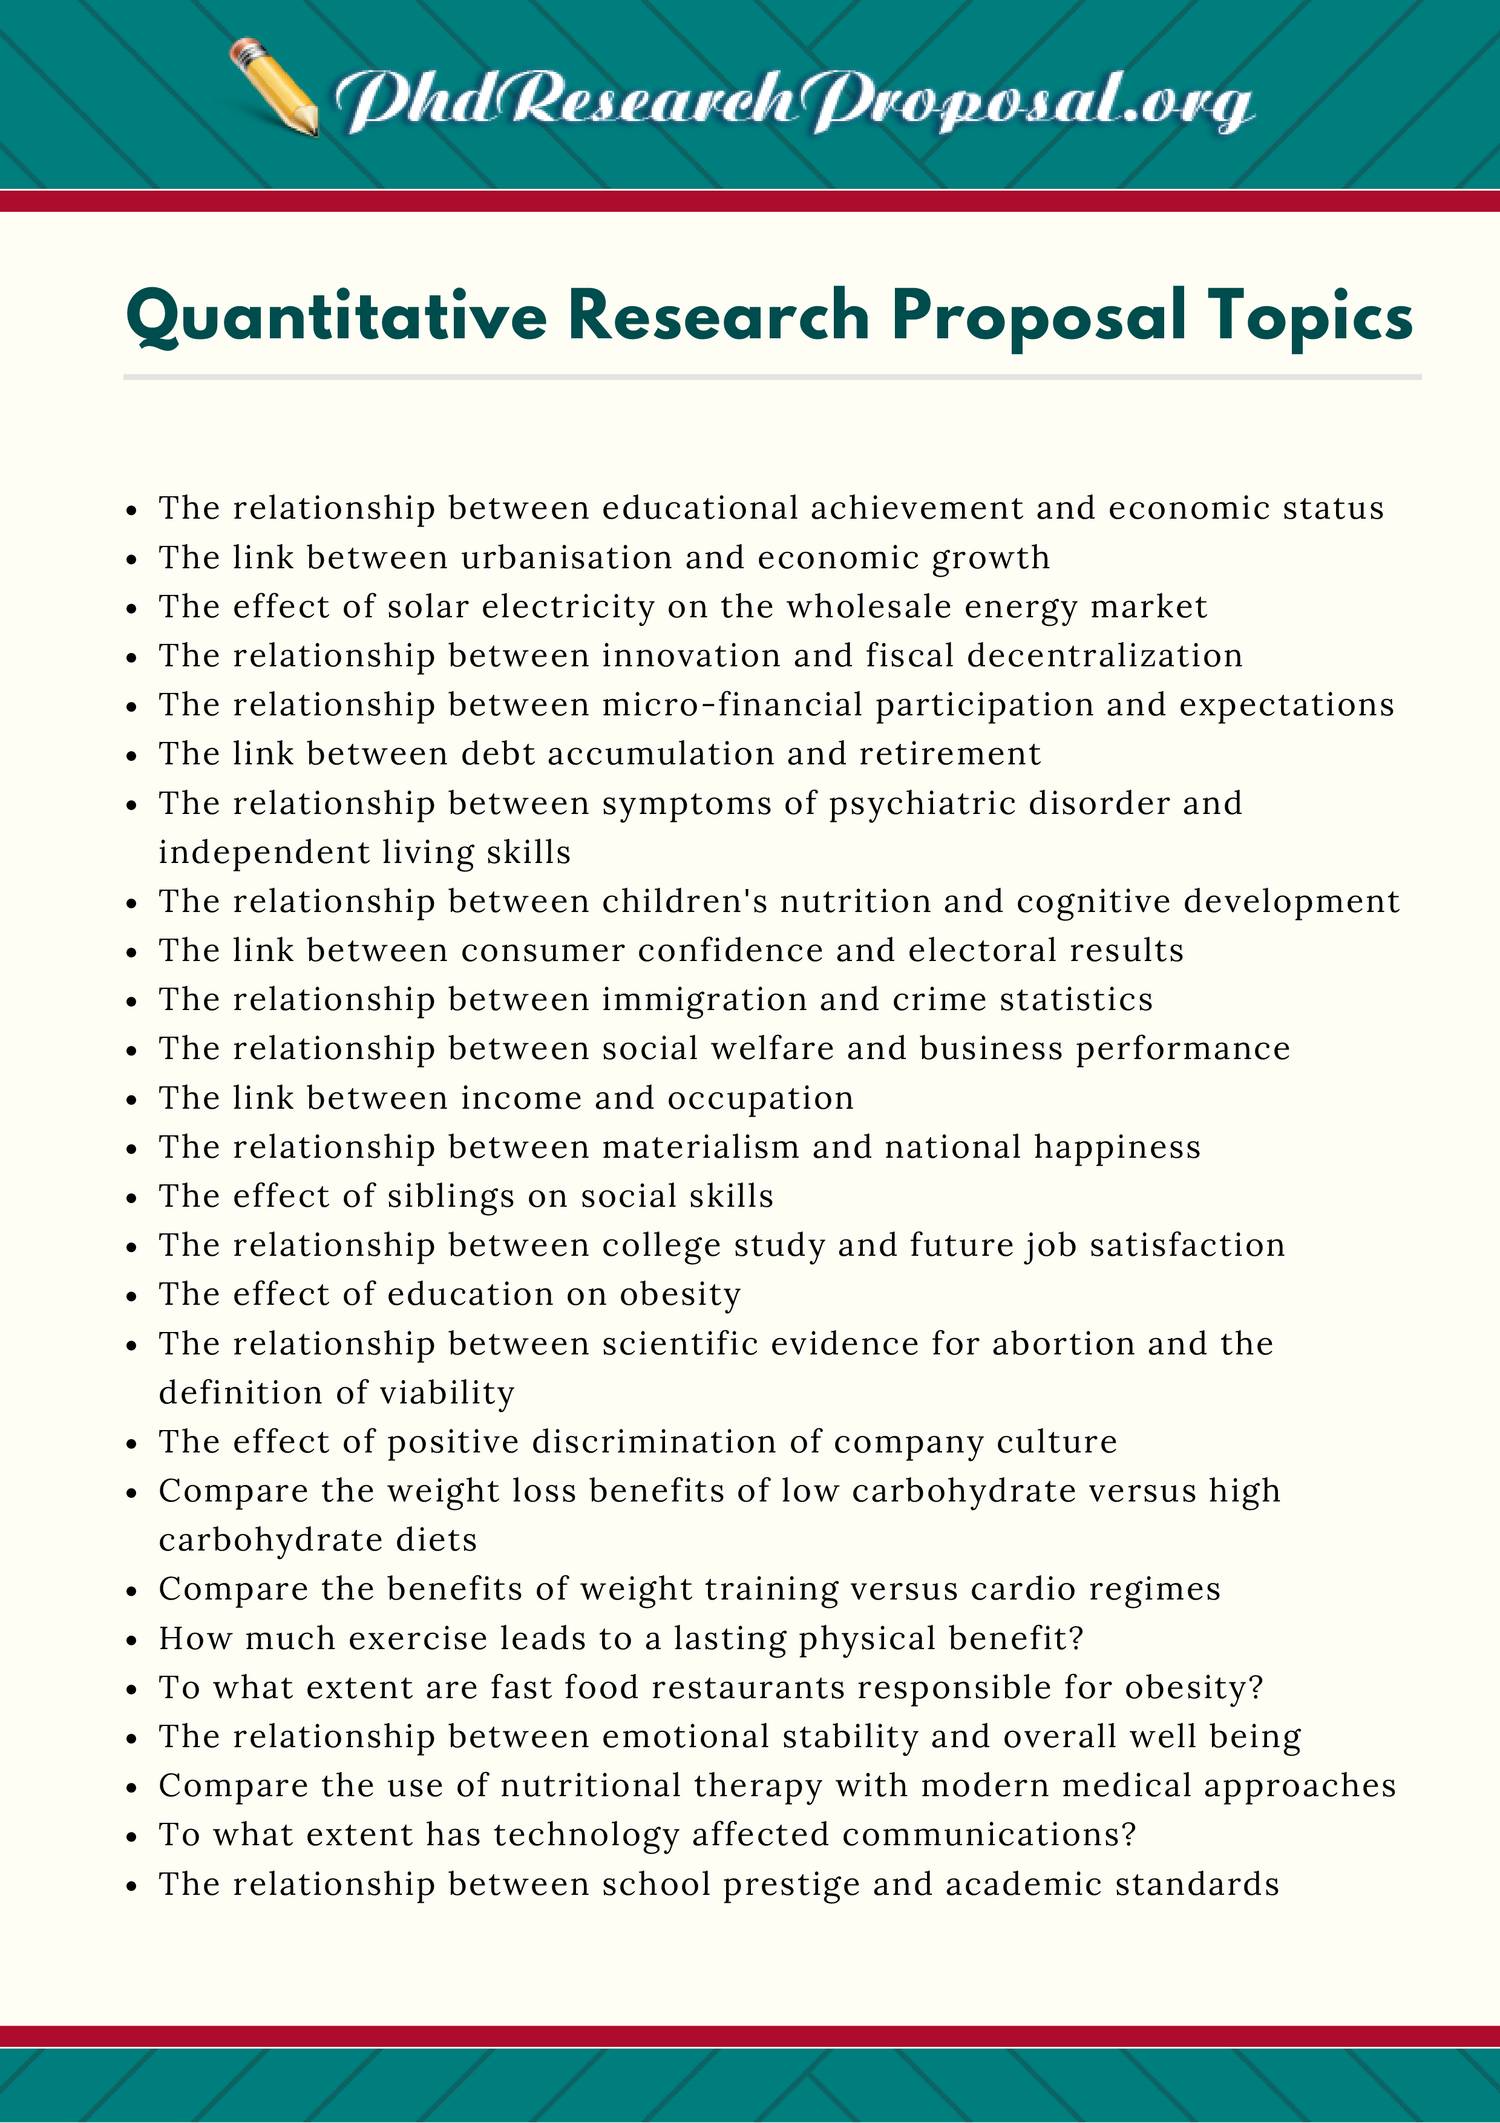 research proposal of topics